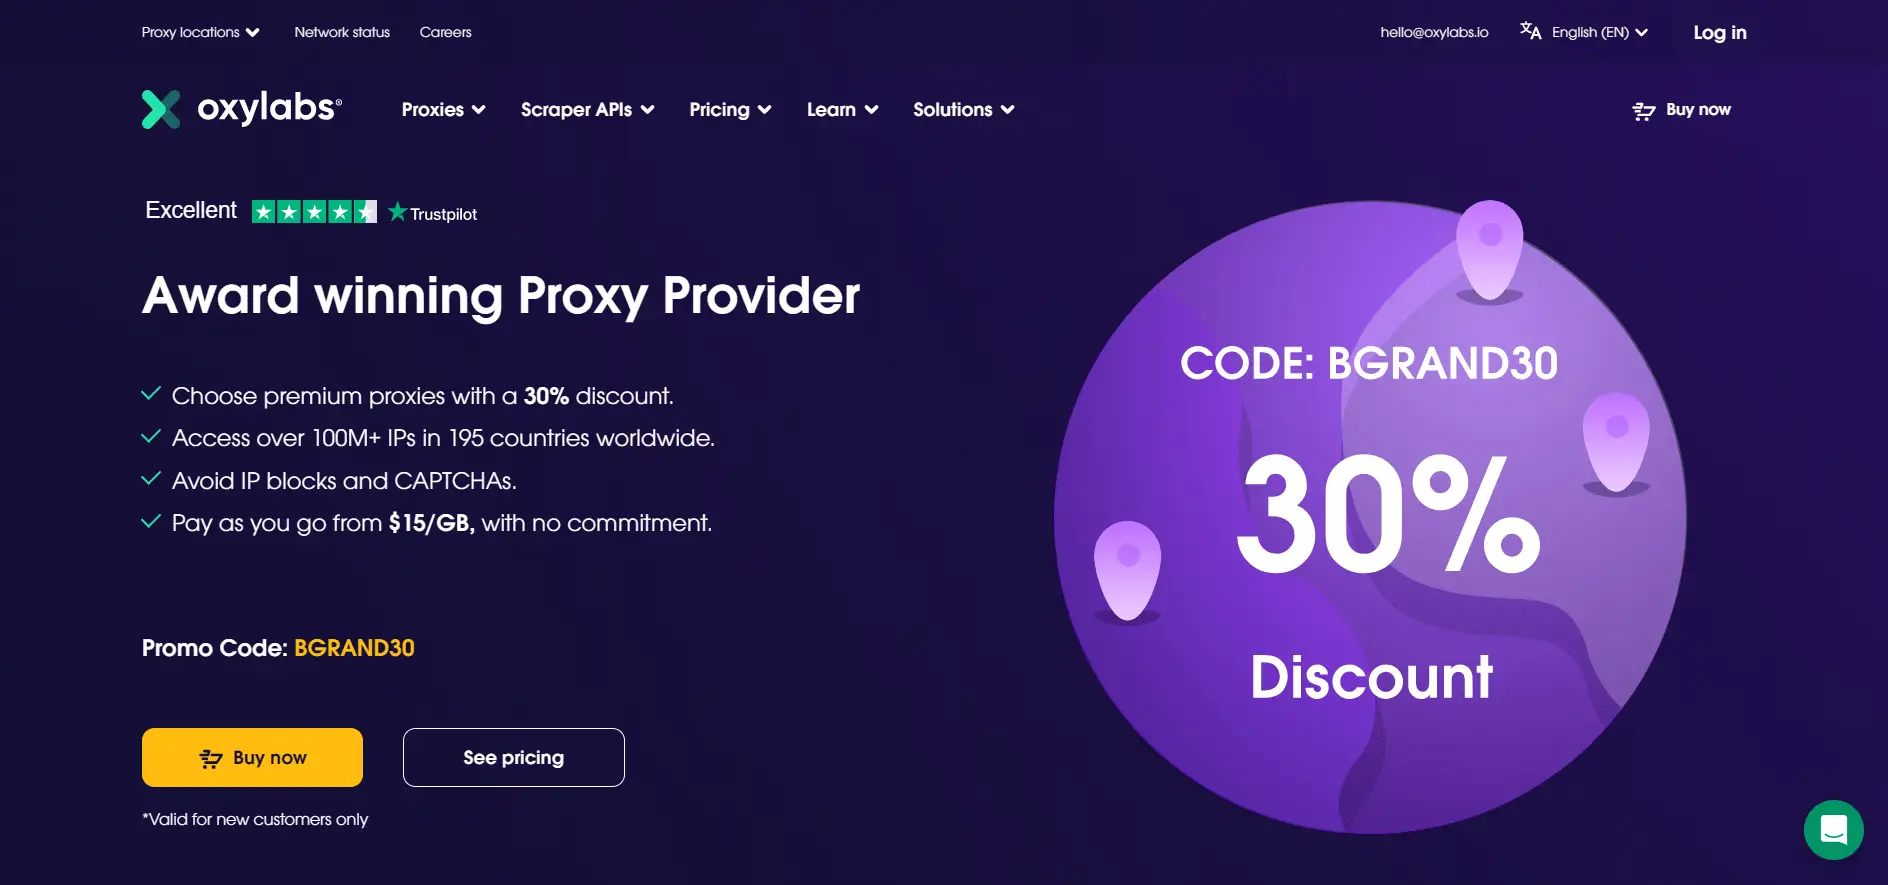 oxylabs - best residential proxy